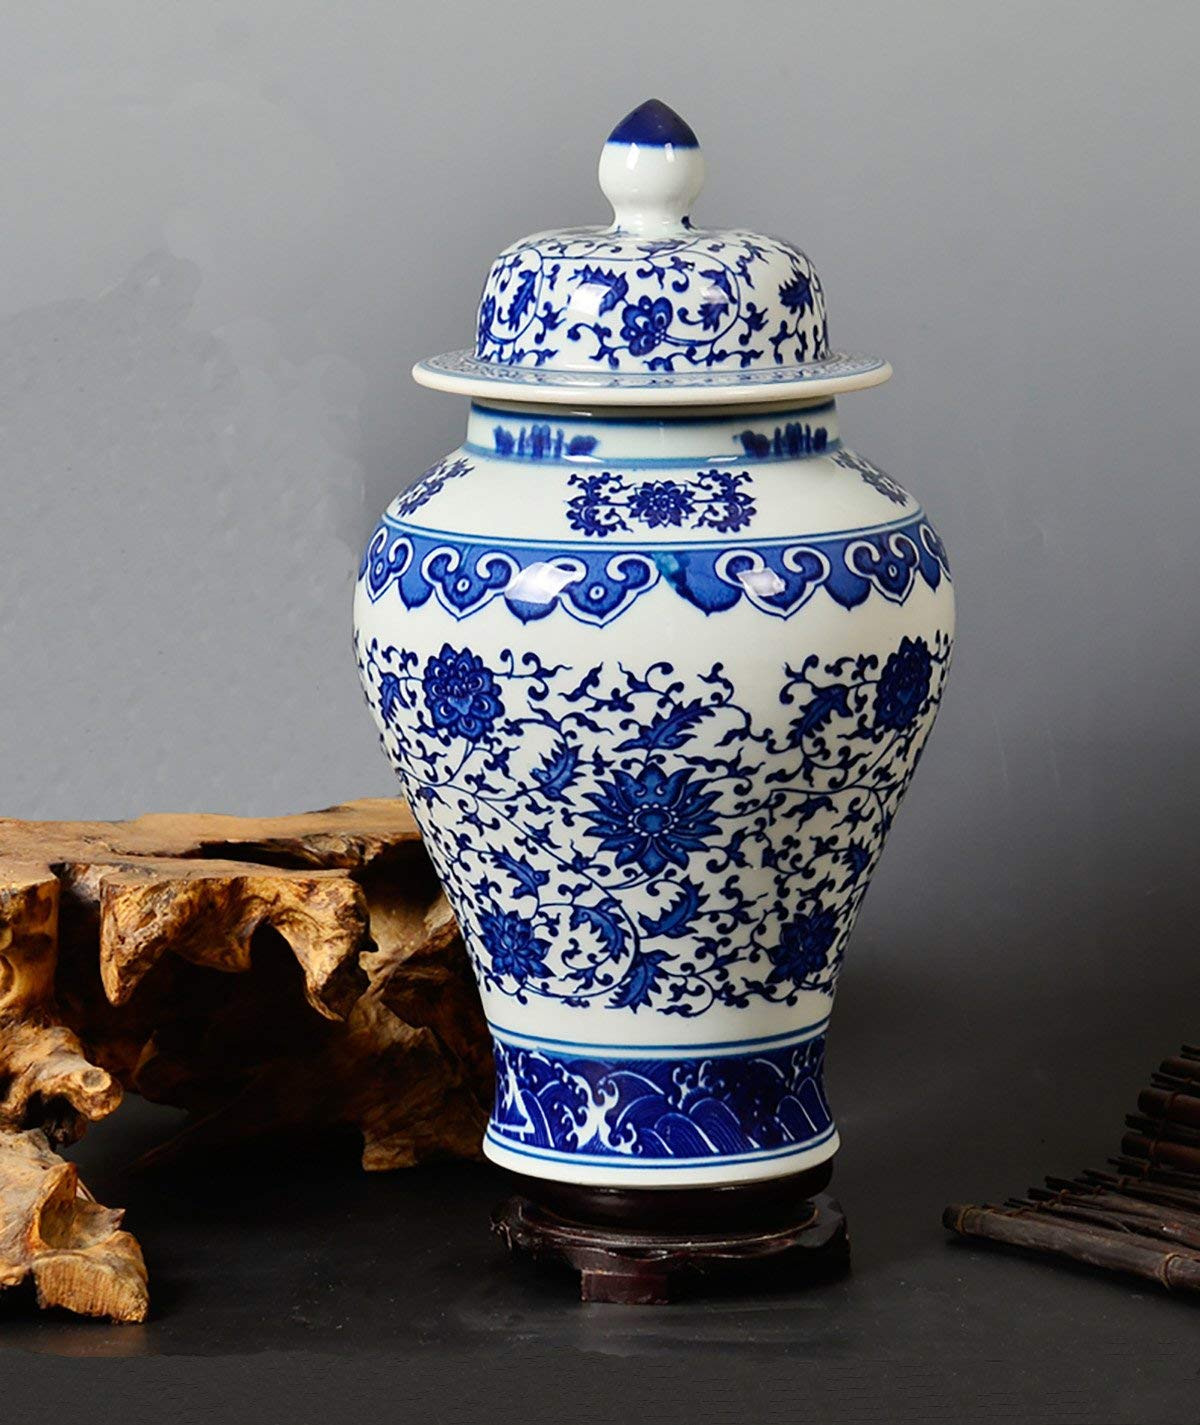 20 Fabulous Chinese Porcelain Vases for Sale 2022 free download chinese porcelain vases for sale of amazon com all decor blue and white ceramic urn fine chinese intended for amazon com all decor blue and white ceramic urn fine chinese porcelain temple sp